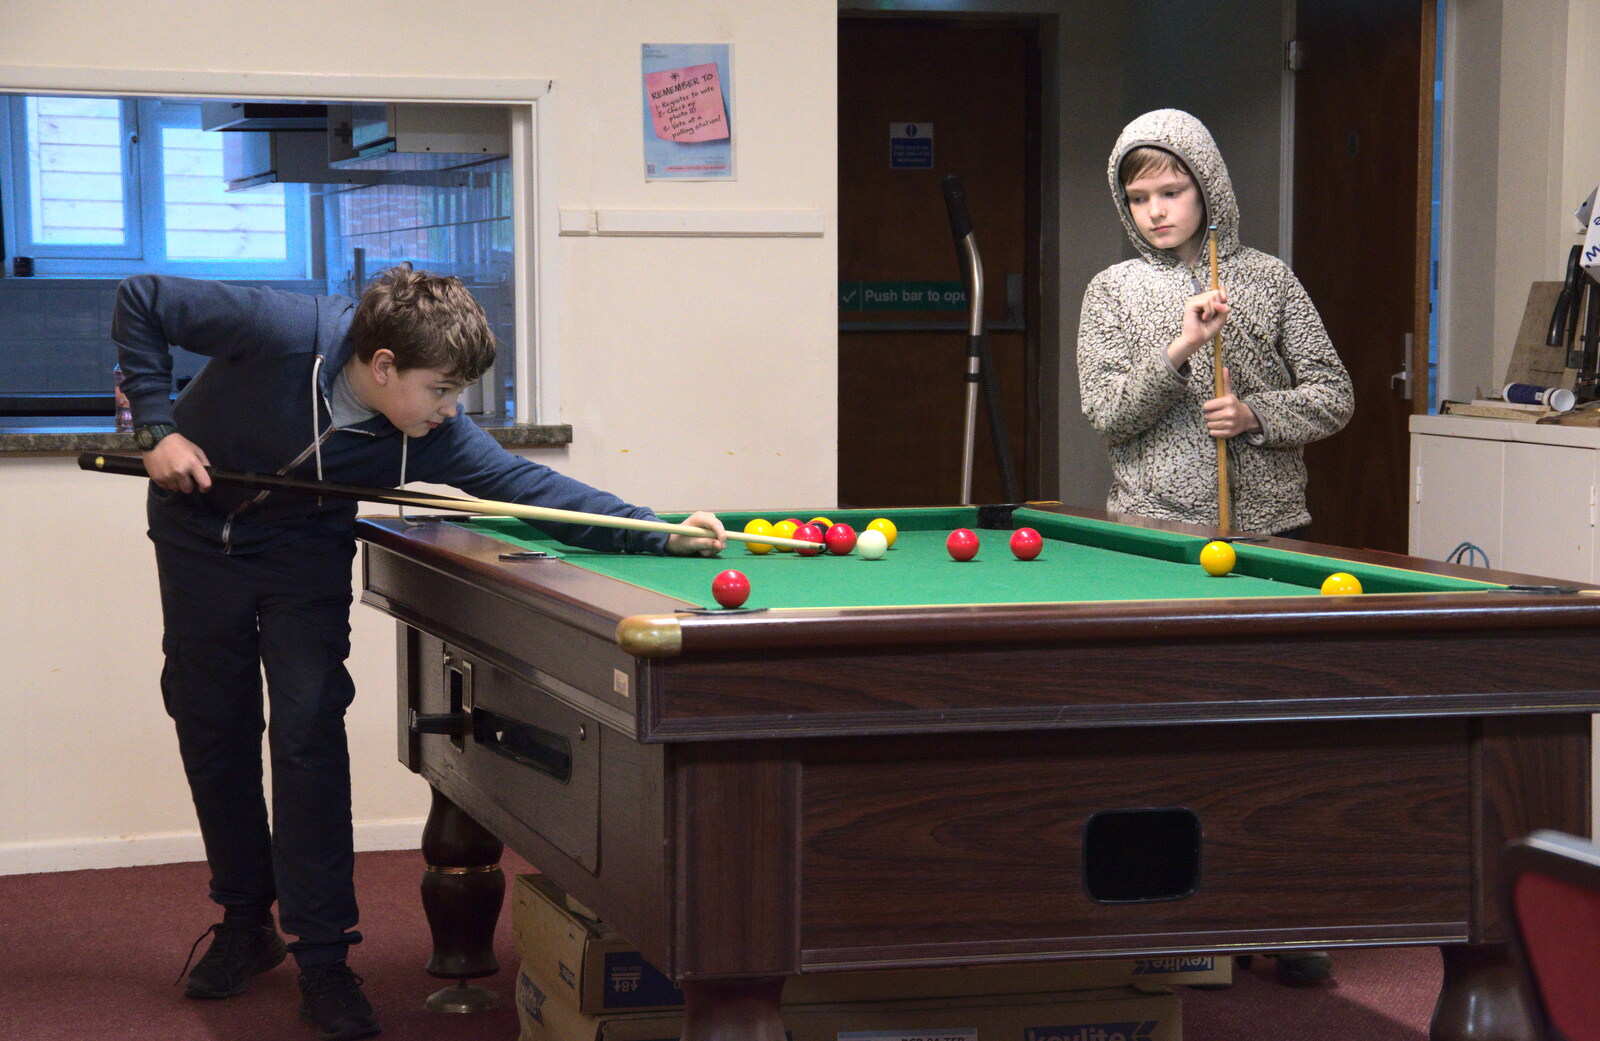 Fred and Harry play a game of pool from Pizza at the Village Hall, Brome, Suffolk - 30th April 2023